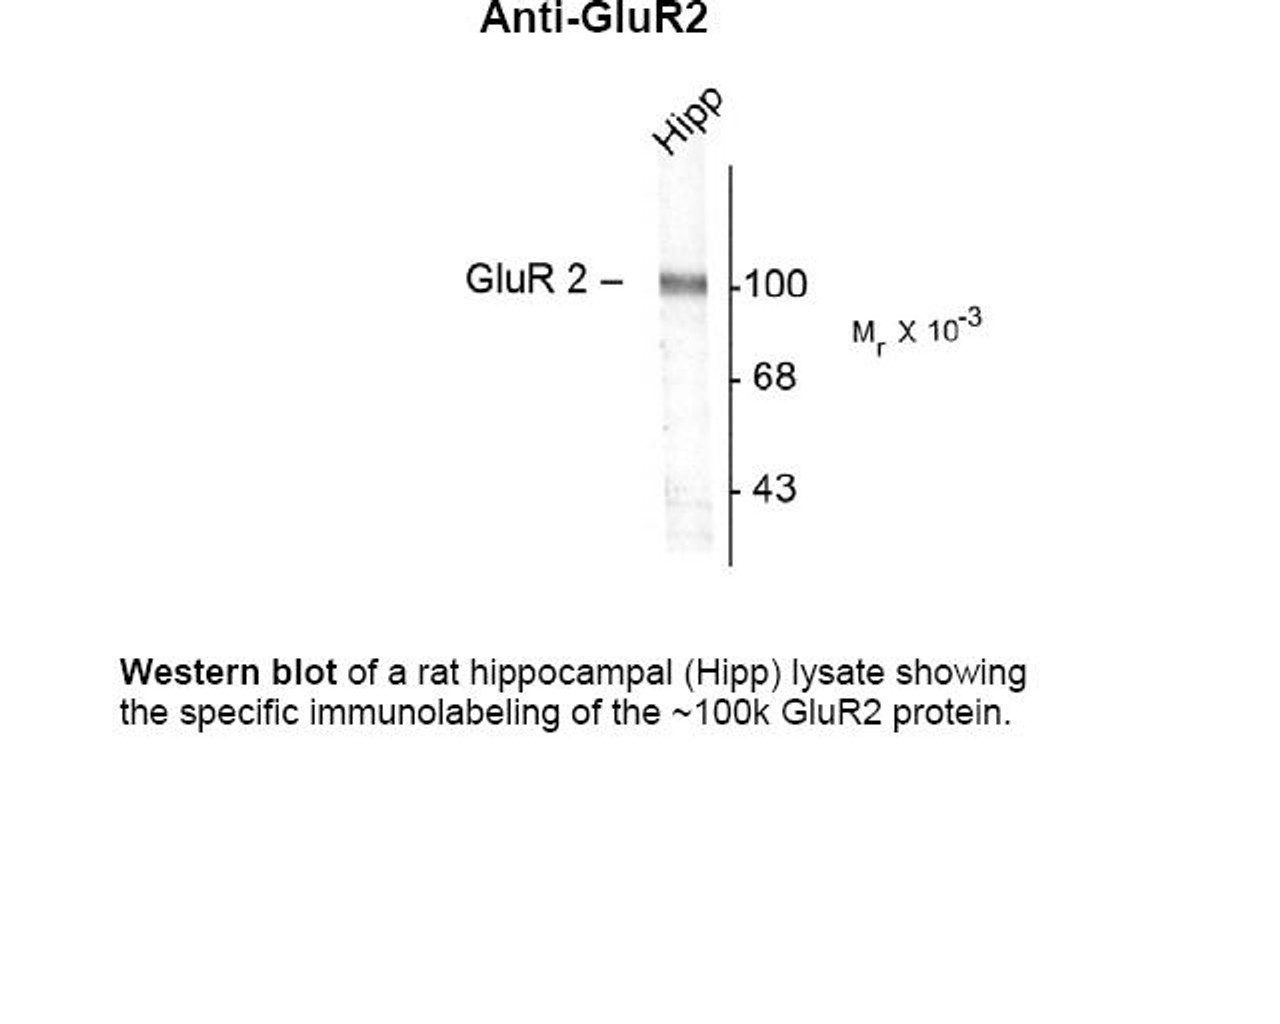 Western blot of a rat hippocampal (Hipp) lysate showing the specific immunolabeling of the ~100k GluR2 protein.